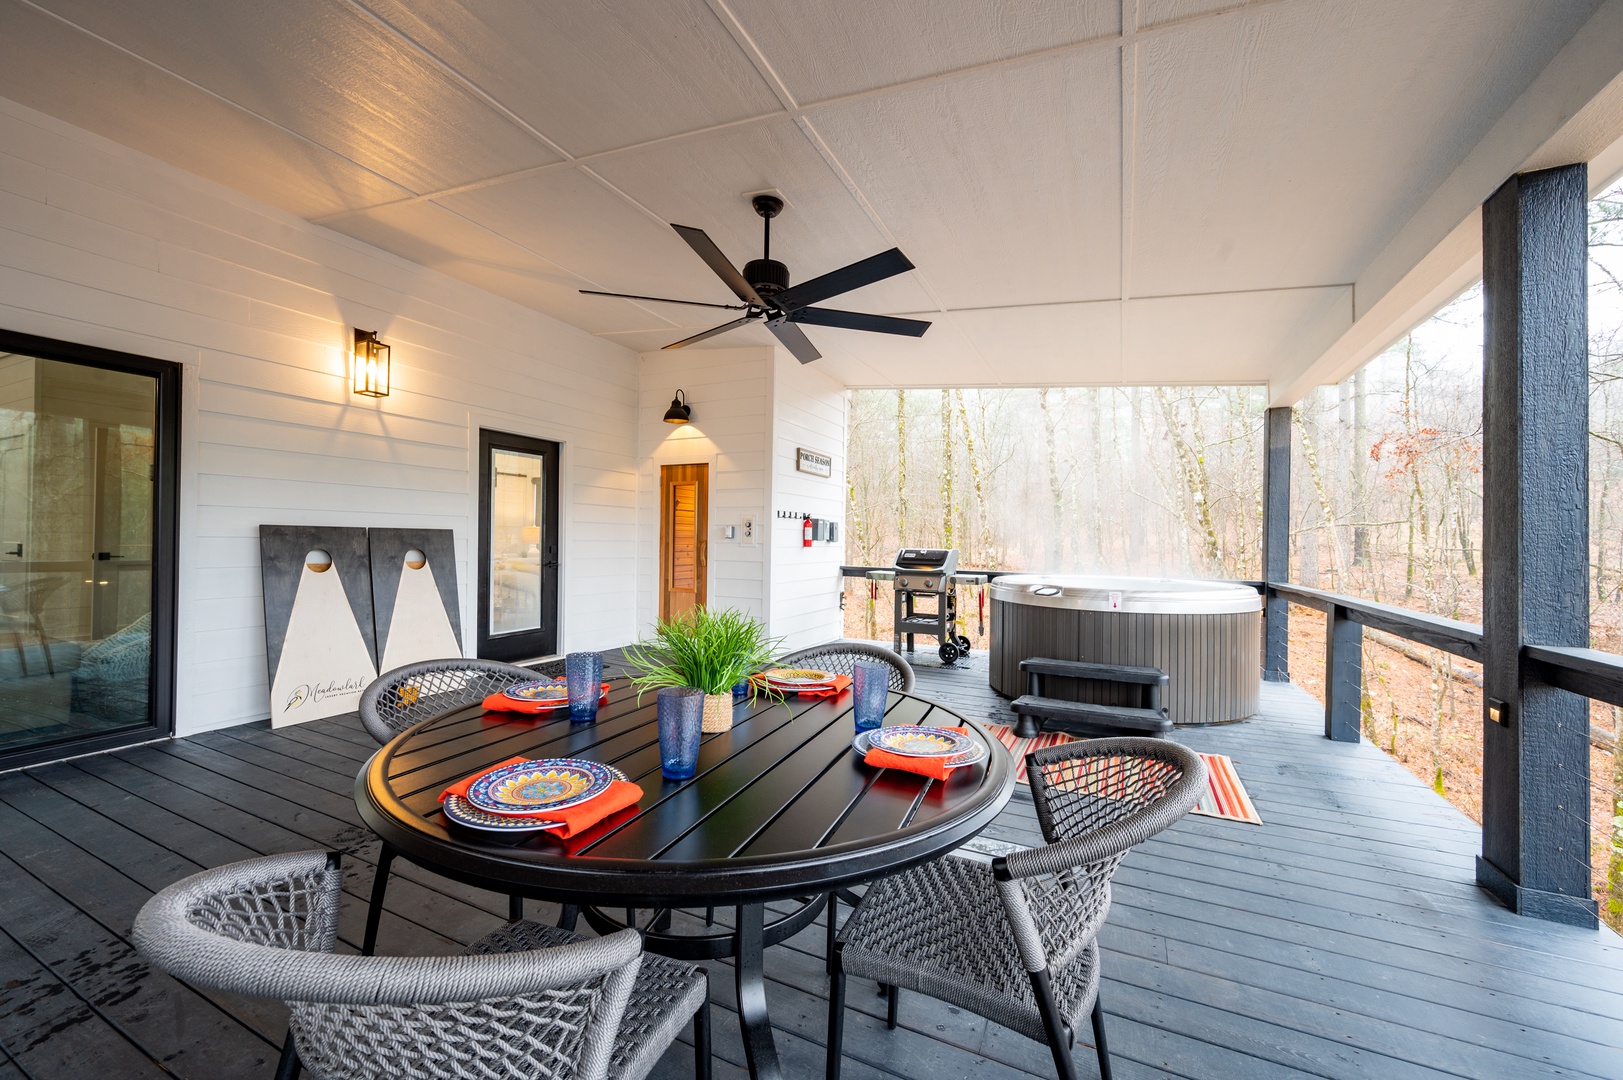 Enjoy a meal on the deck when weather permits